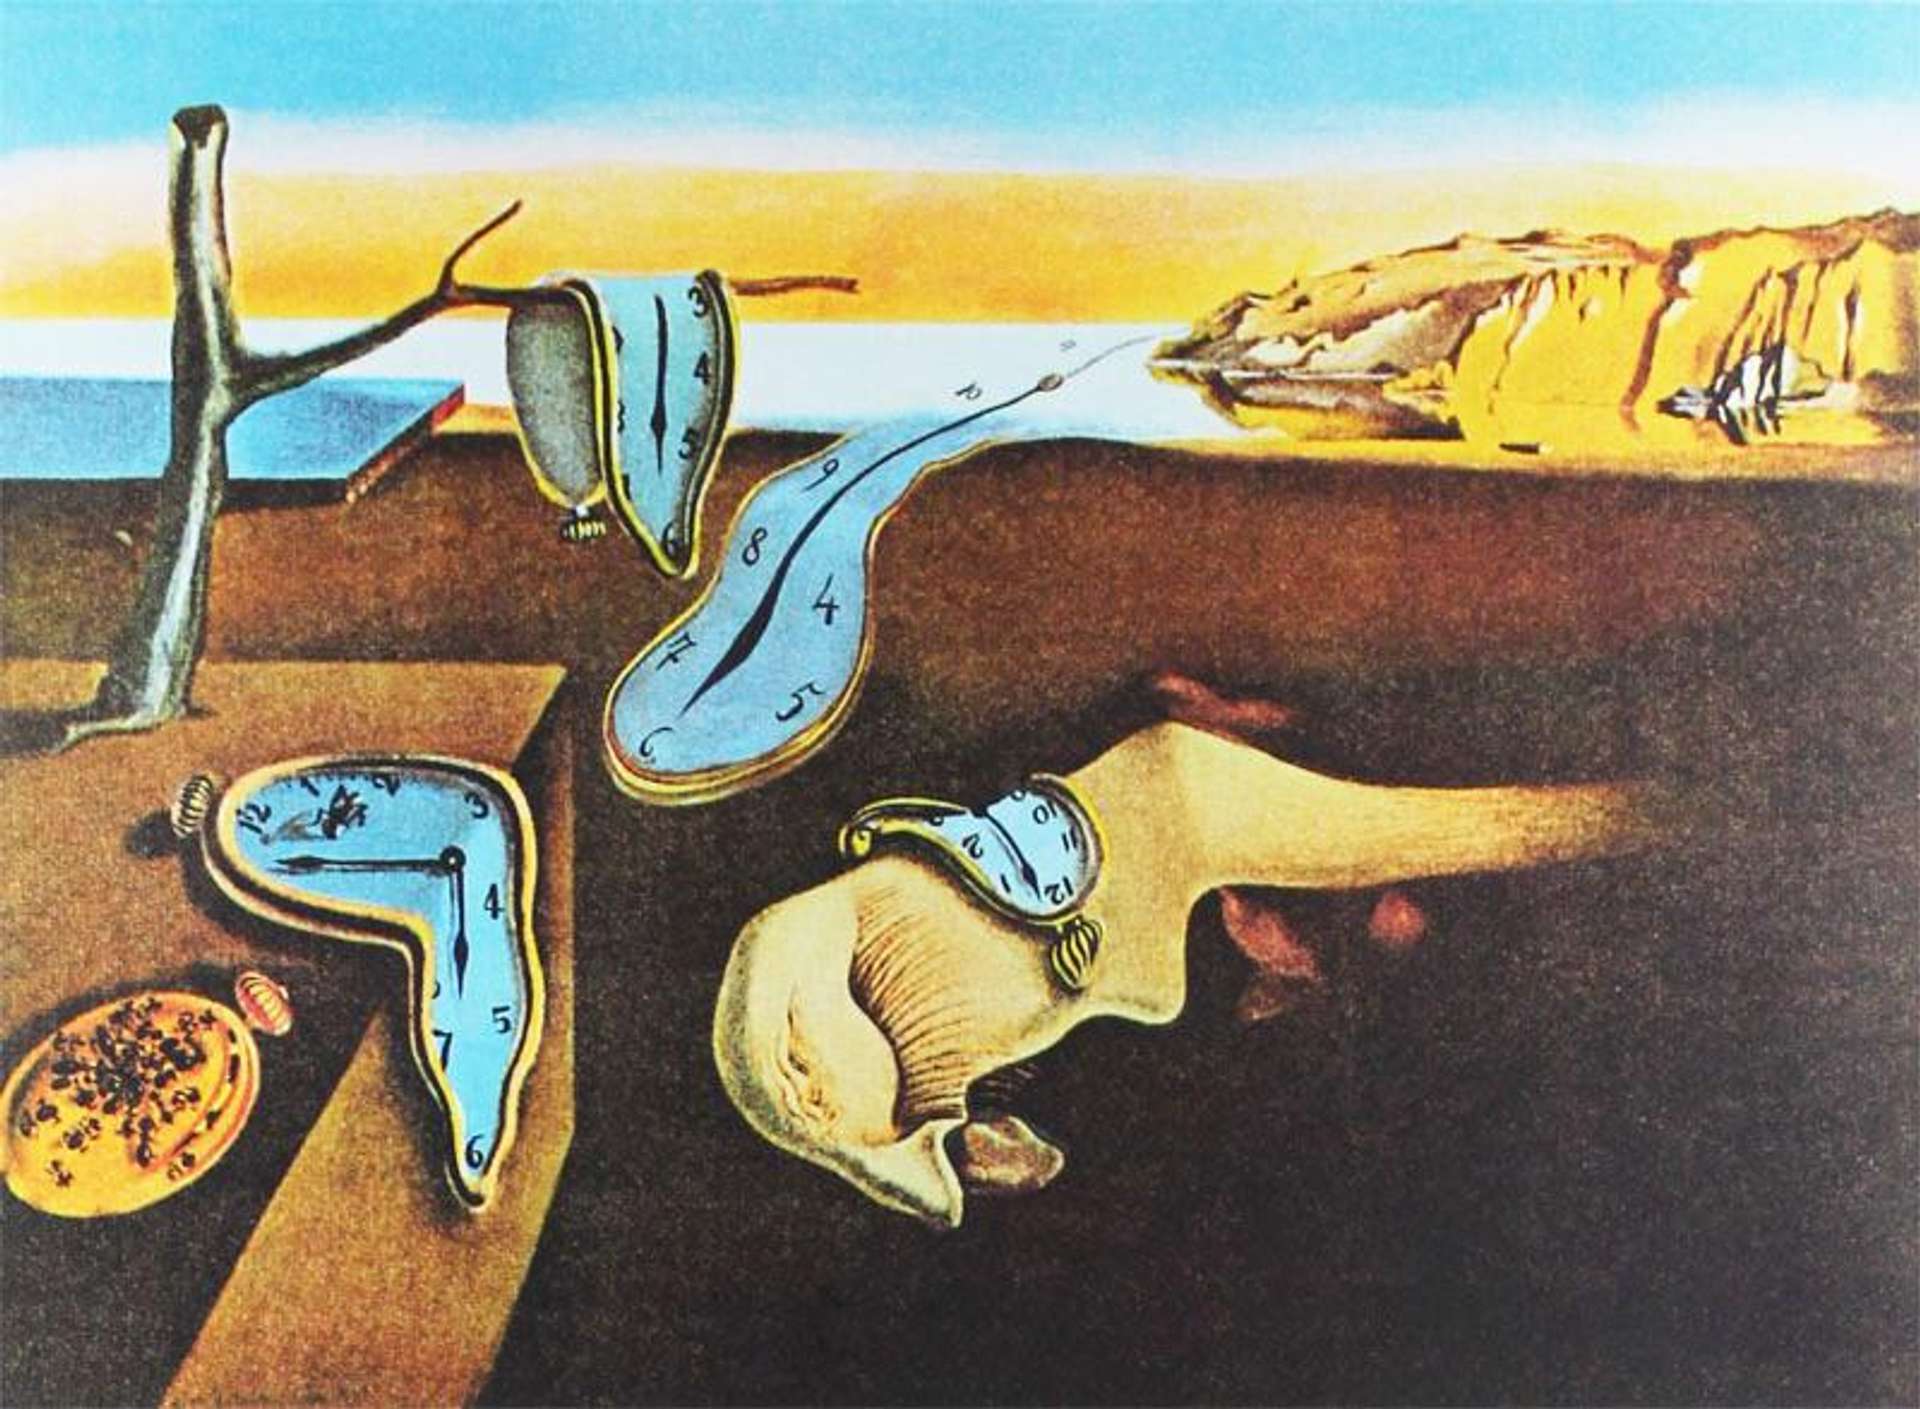 Persistence Of Memory by Salvador Dalí